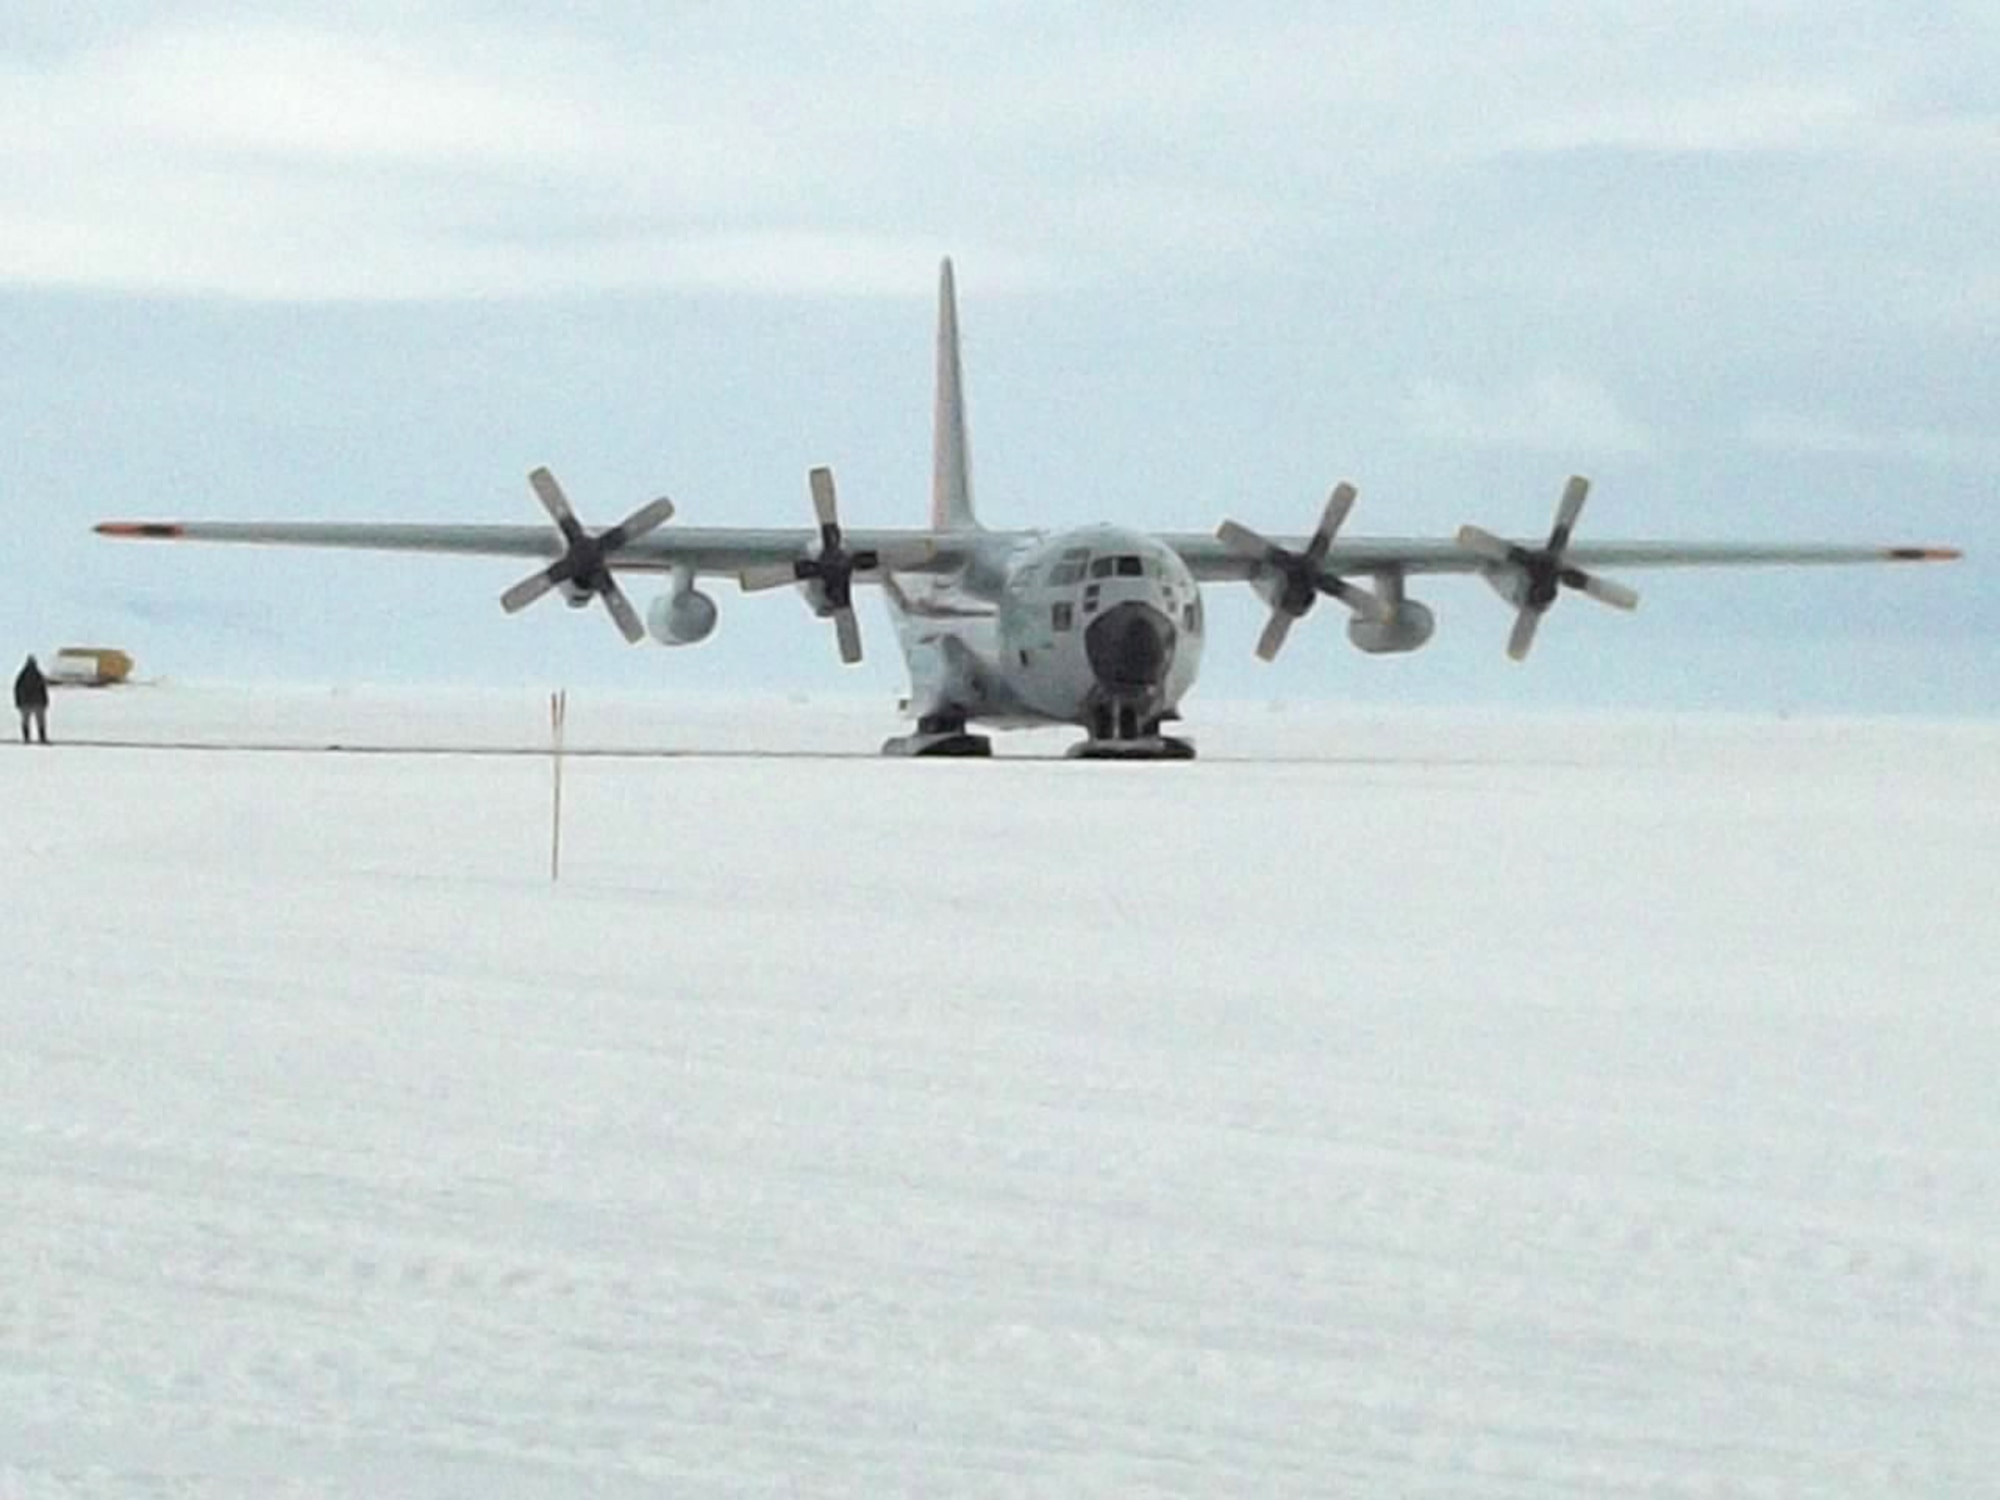 A New York Air National Guard LC-130 lands on an ice runway at McMurdo Station, Antarctica, on Jan. 18, 2012, during a resupply sortie flown in support of Operation Deep Freeze. New York requested the assistance of two Kentucky Air National Guardsmen for Deep Freeze, which supports scientific research at the bottom of the world. (U.S. Air Force photo by Master Sgt. Jason Smith)